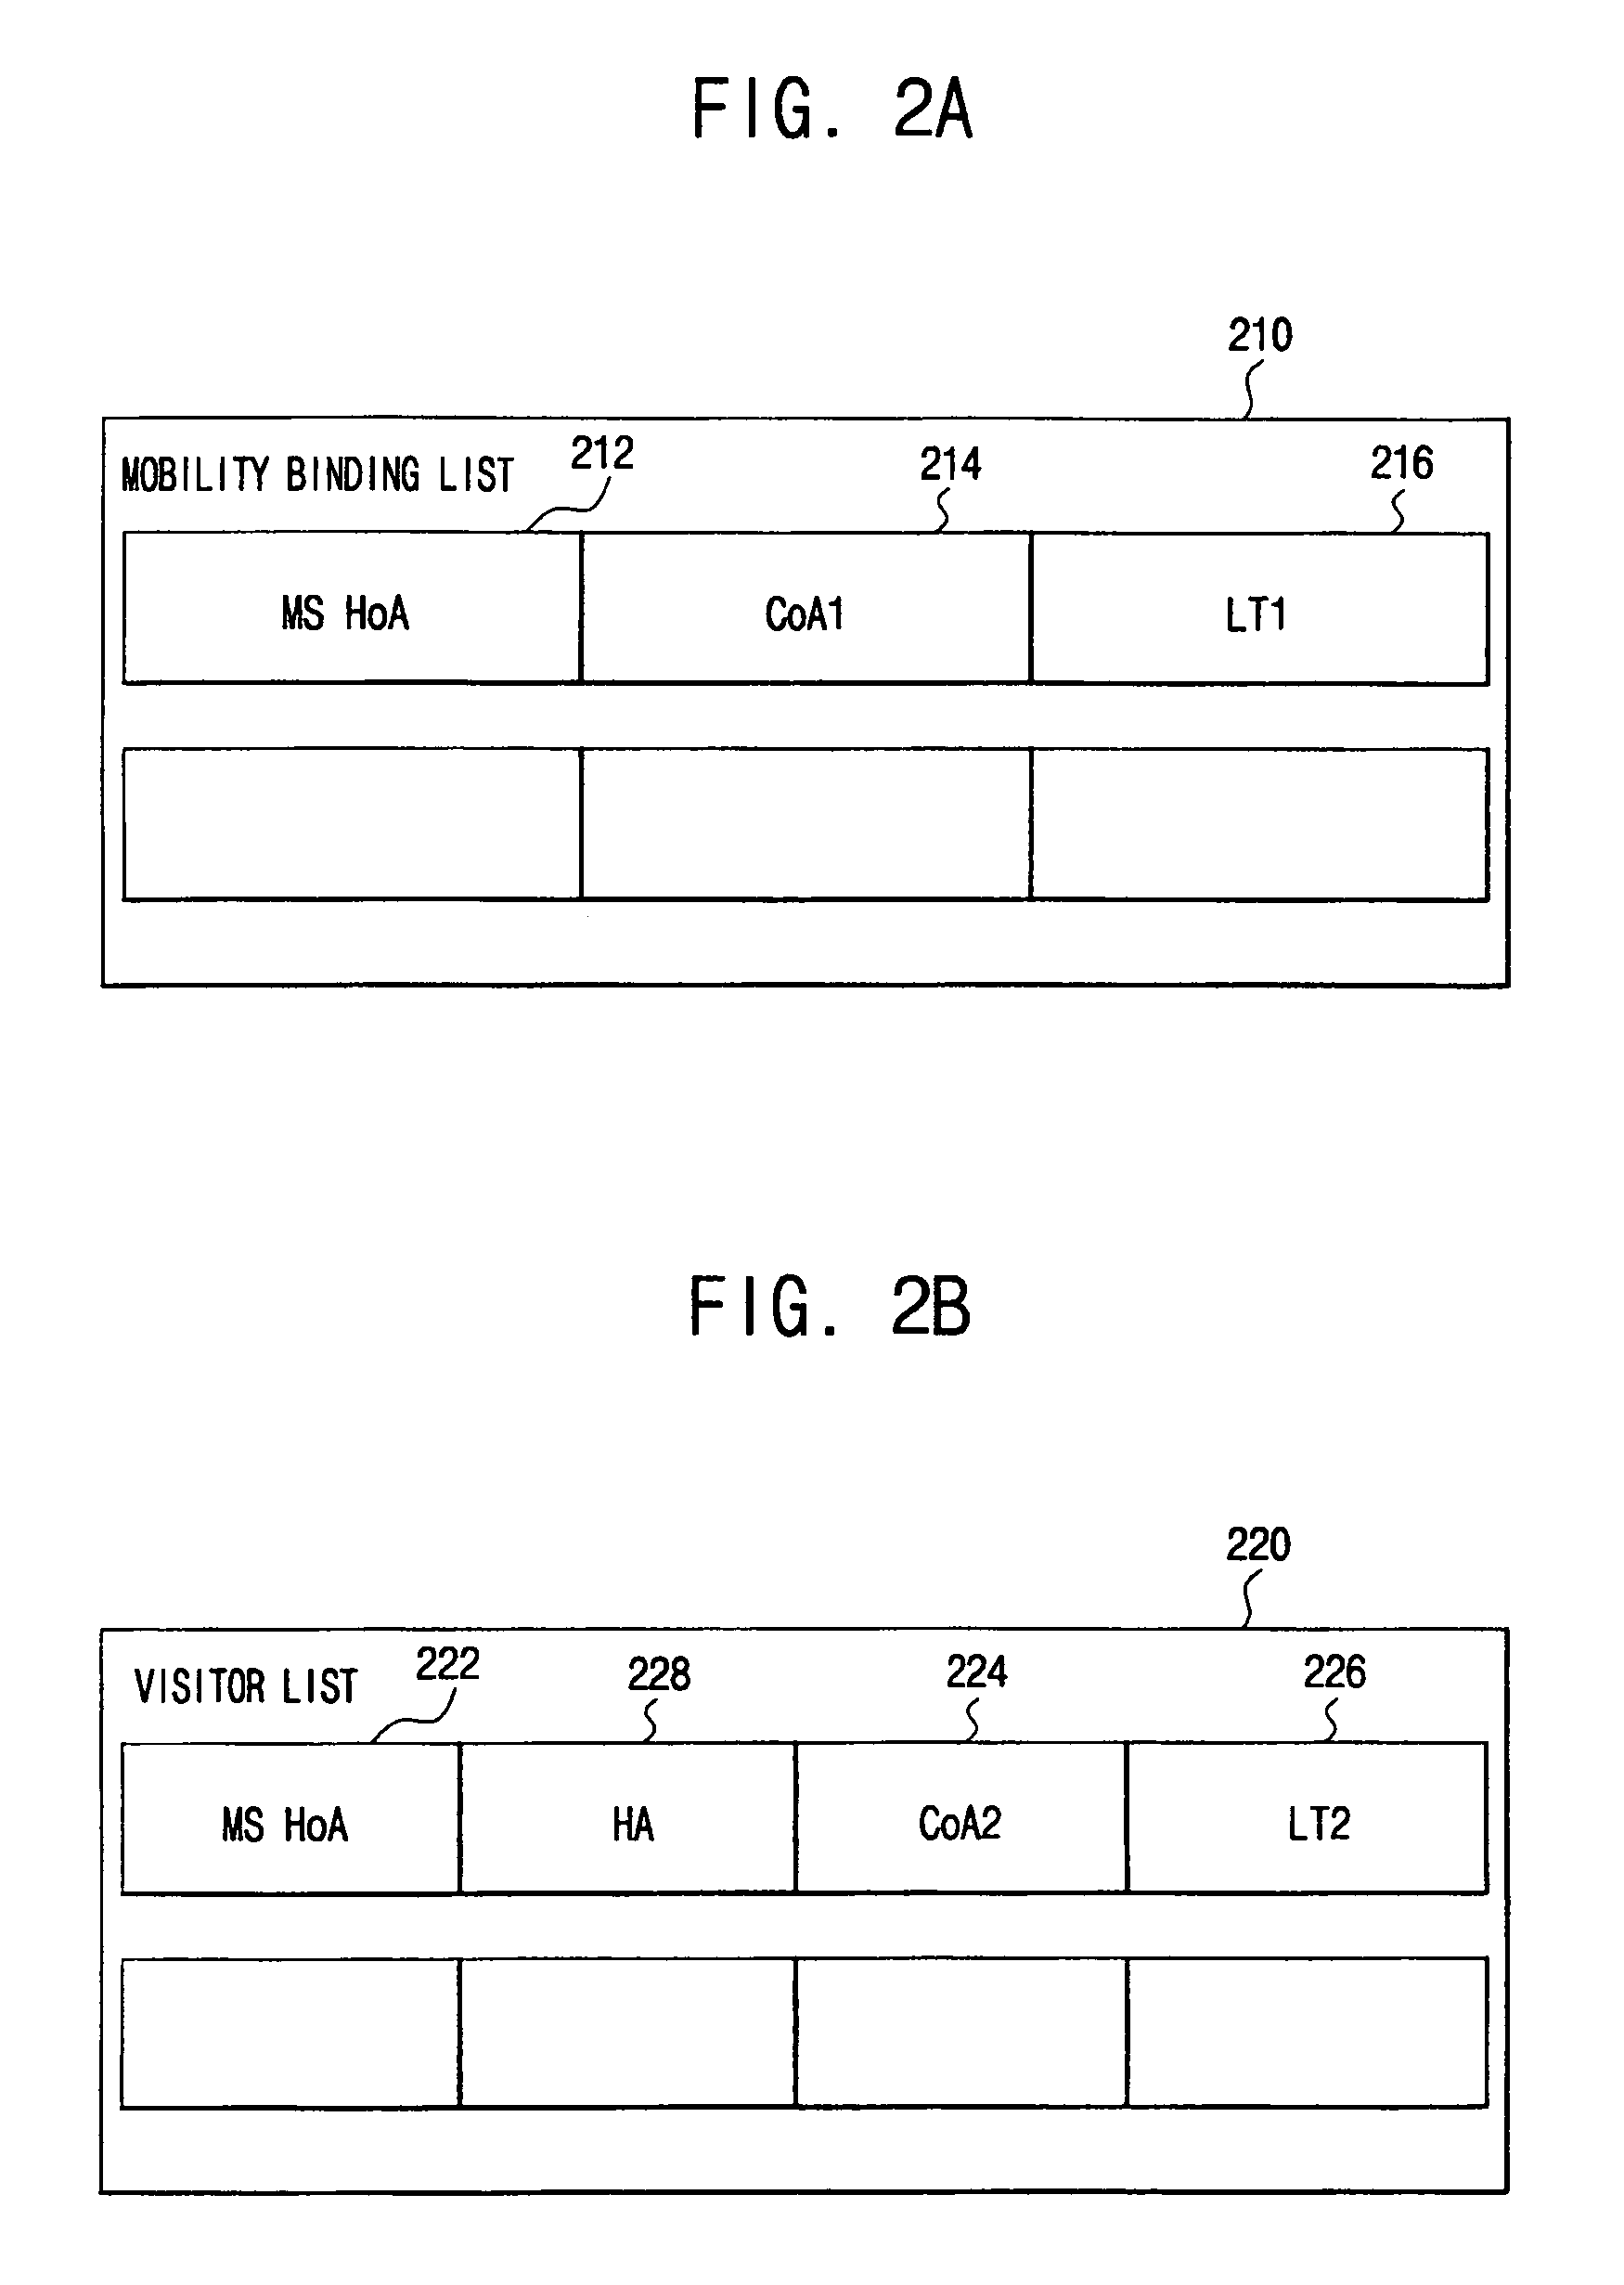 Method and system for lossless transmission of mobile IP packets in handover of a mobile terminal